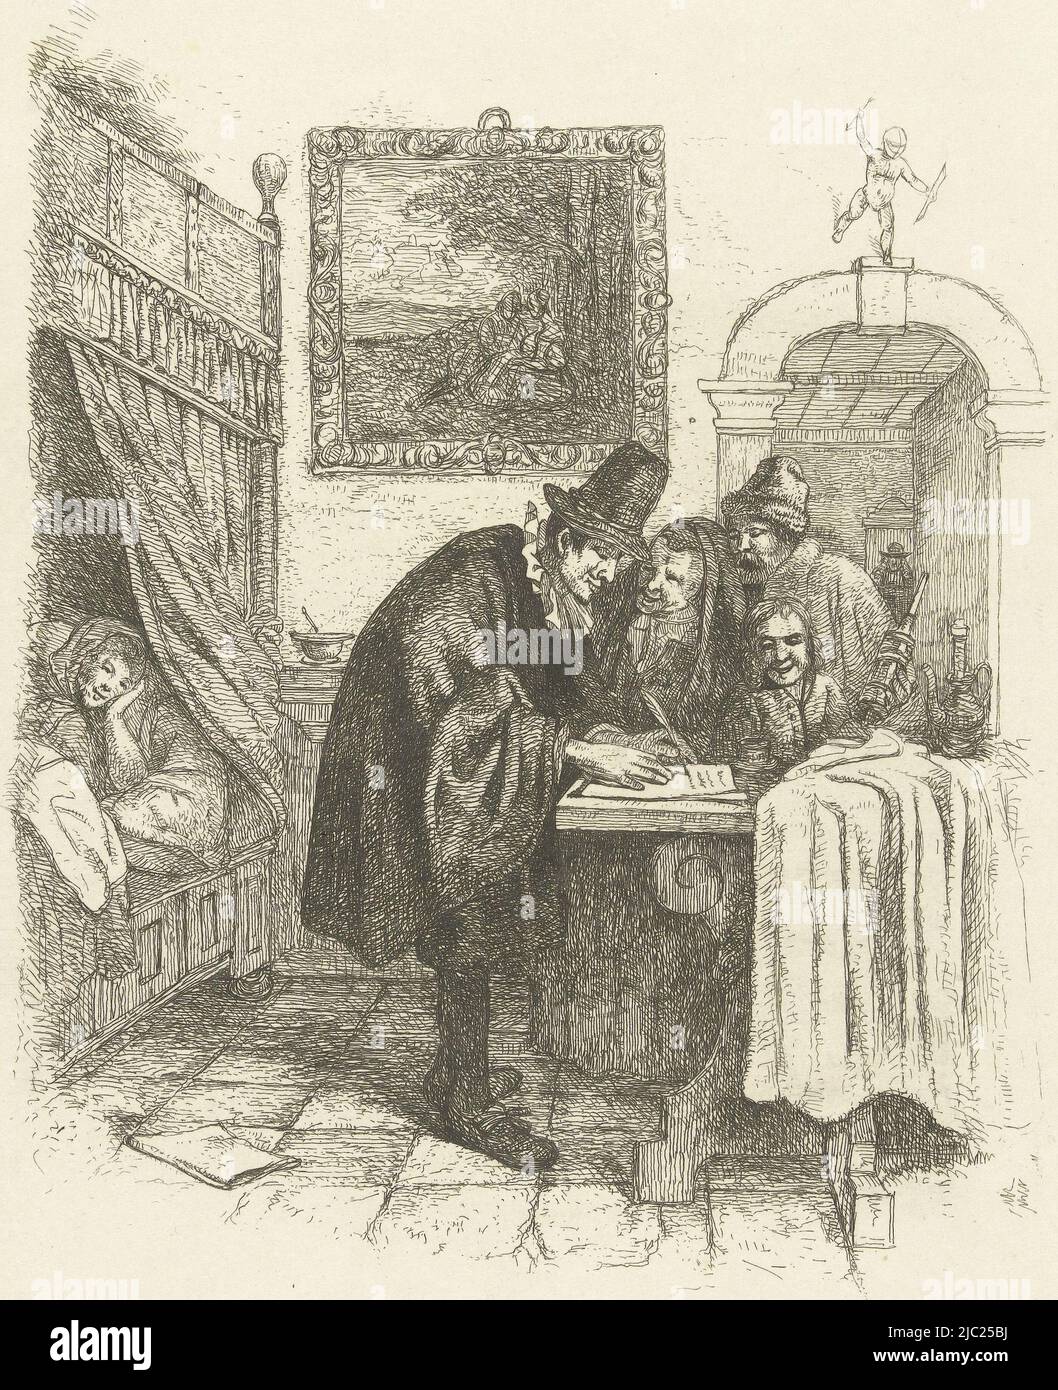 A doctor writes a prescription standing at a table. An old woman, a man with a glandular syringe and a boy look on. The patient, a sick woman, is in bed. Inside, a painting on the wall depicts a pastoral scene. On top of the counter is a small statue of Amor, Doctor on home visit to sick woman, print maker: Albertus Brondgeest, after: Jan Havicksz. Steen, Netherlands, 1796 - 1849, paper, etching, h 249 mm × w 164 mm Stock Photo